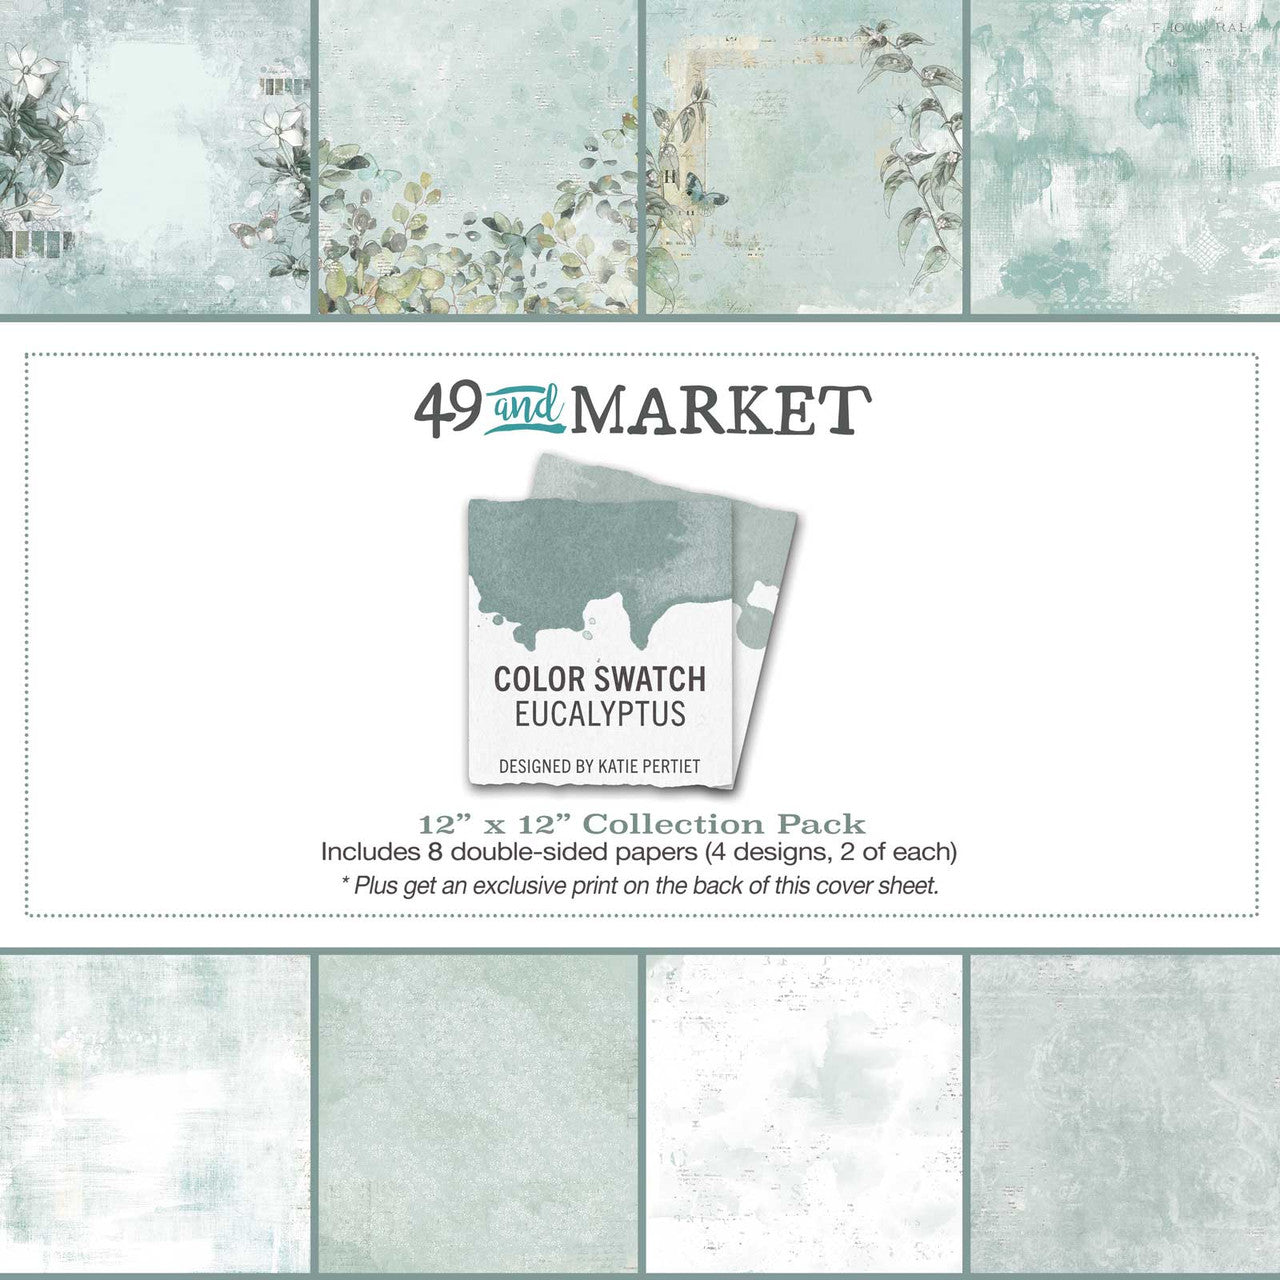 49 and Market Color Swatch Eucalyptus 12 x 12 Collection Paper Pack